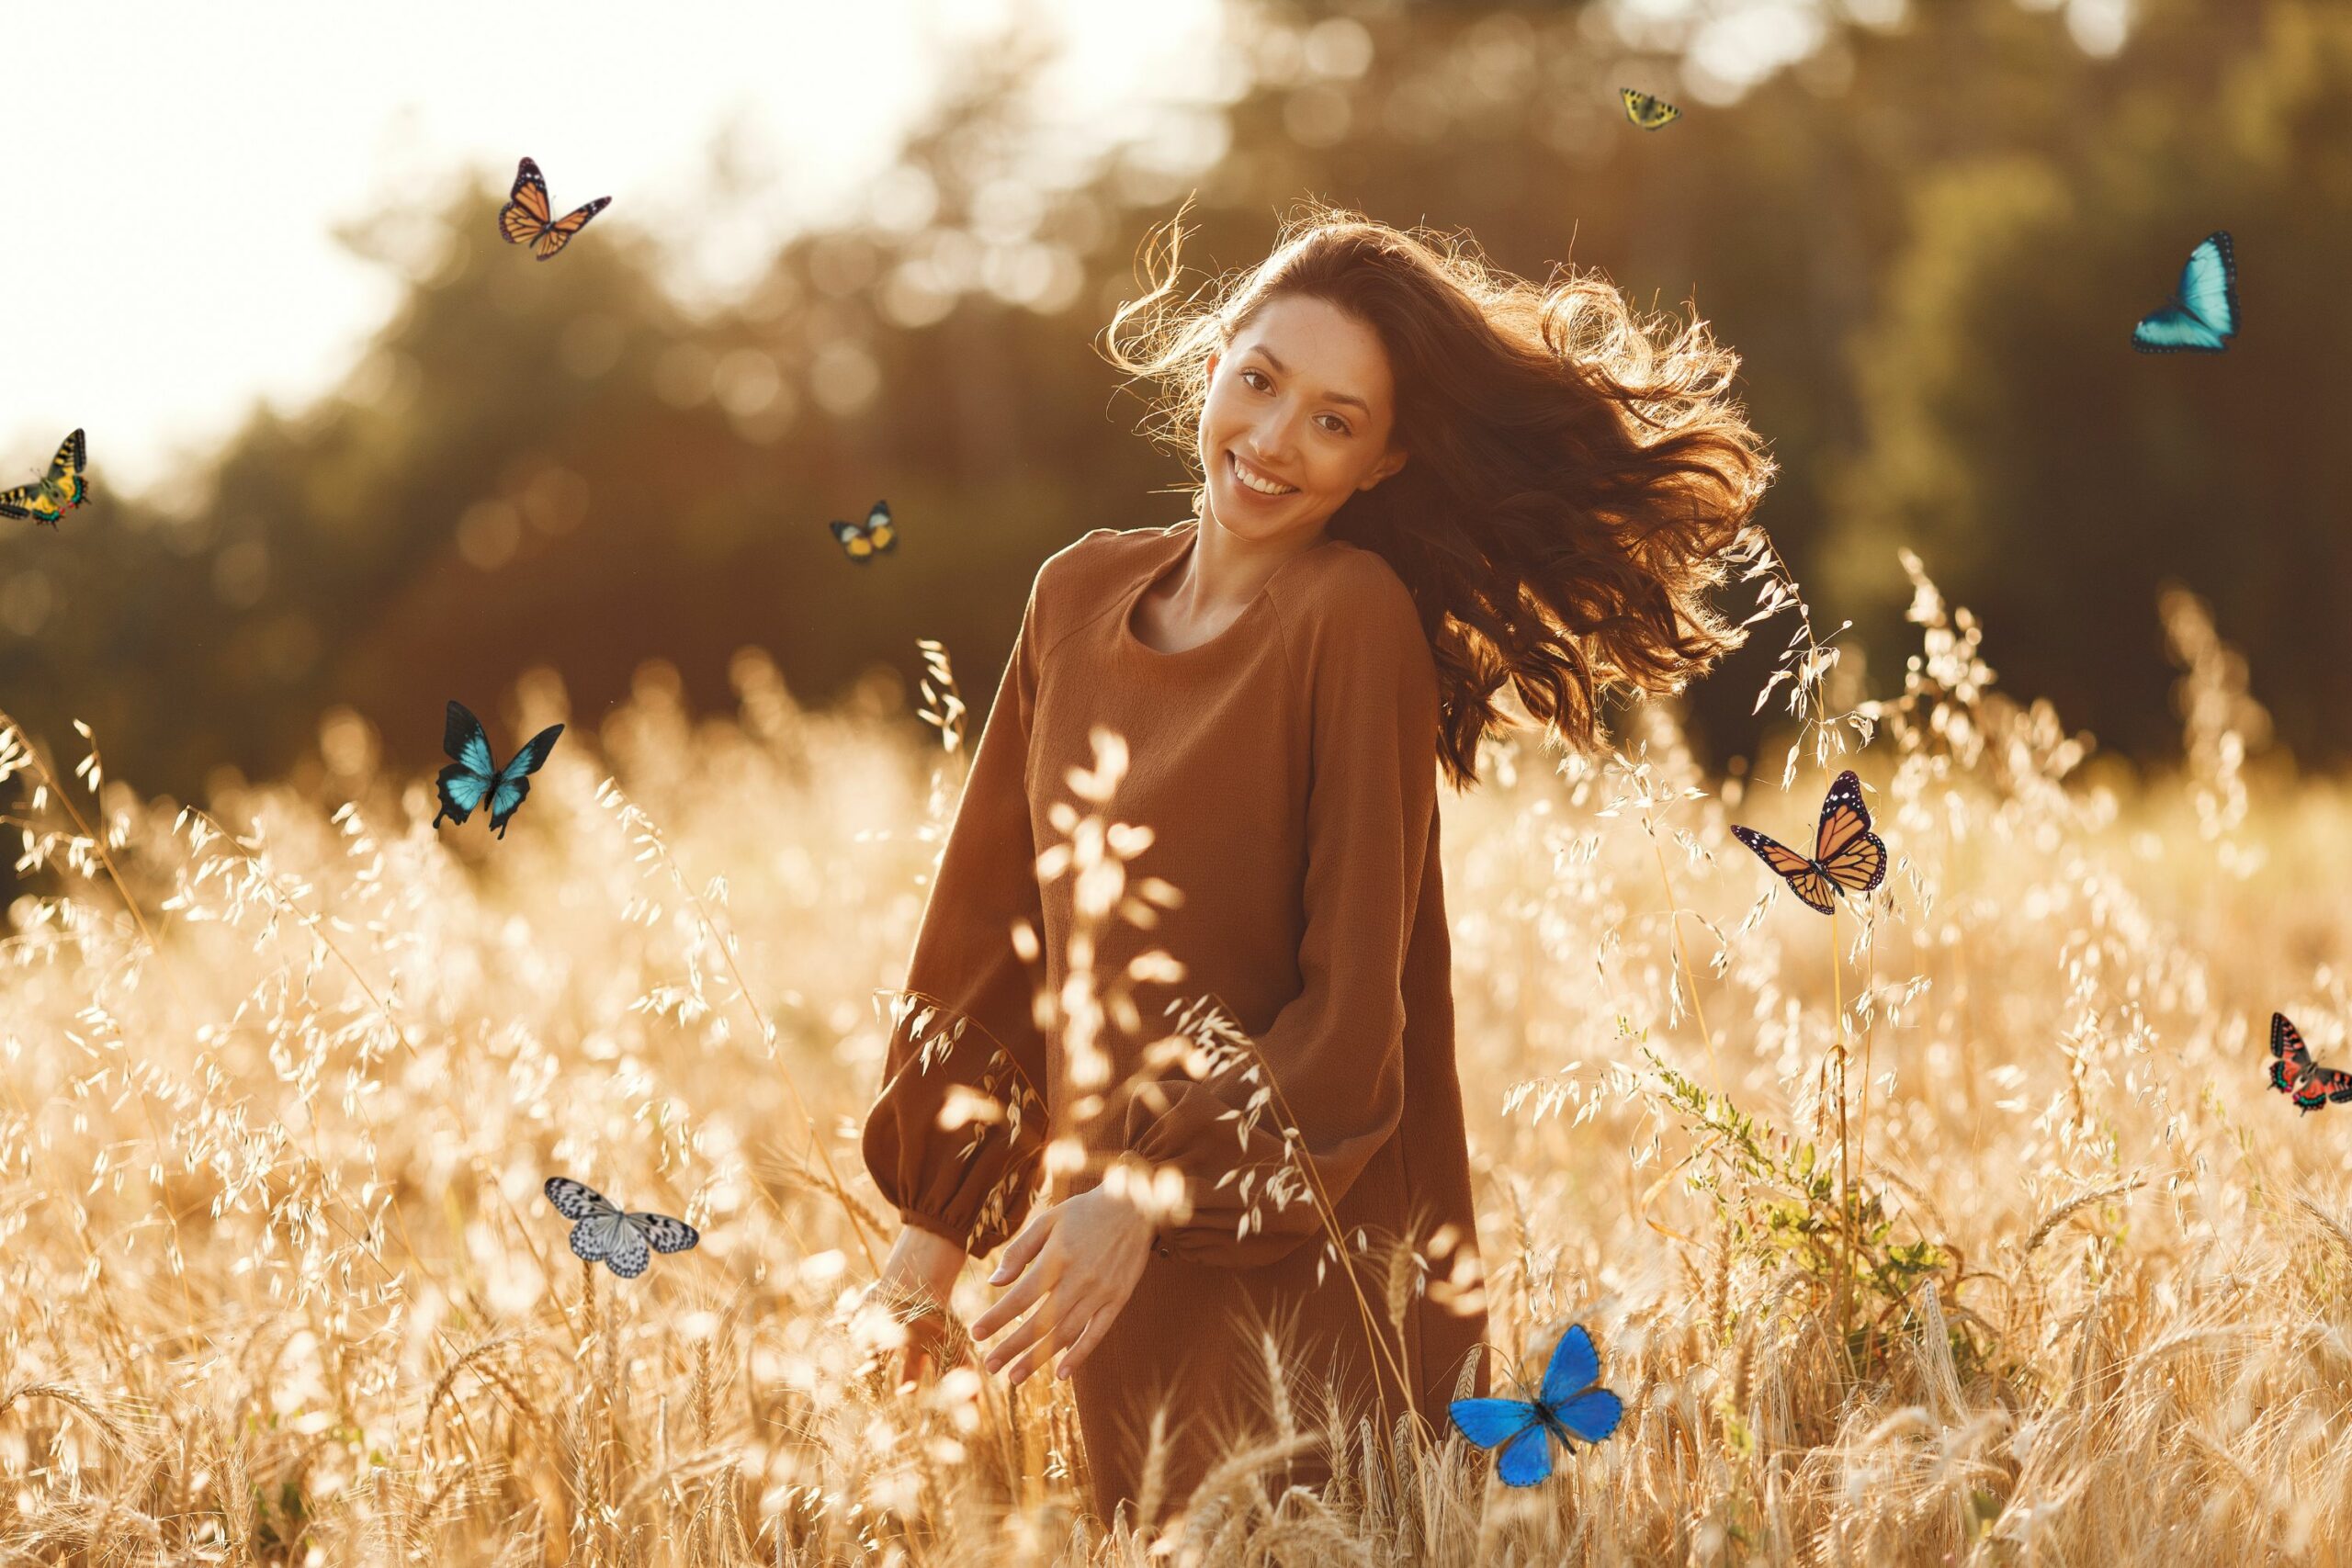 Smiling woman in a field surrounded by colorful butterflies wondering what do butterflies symbolize